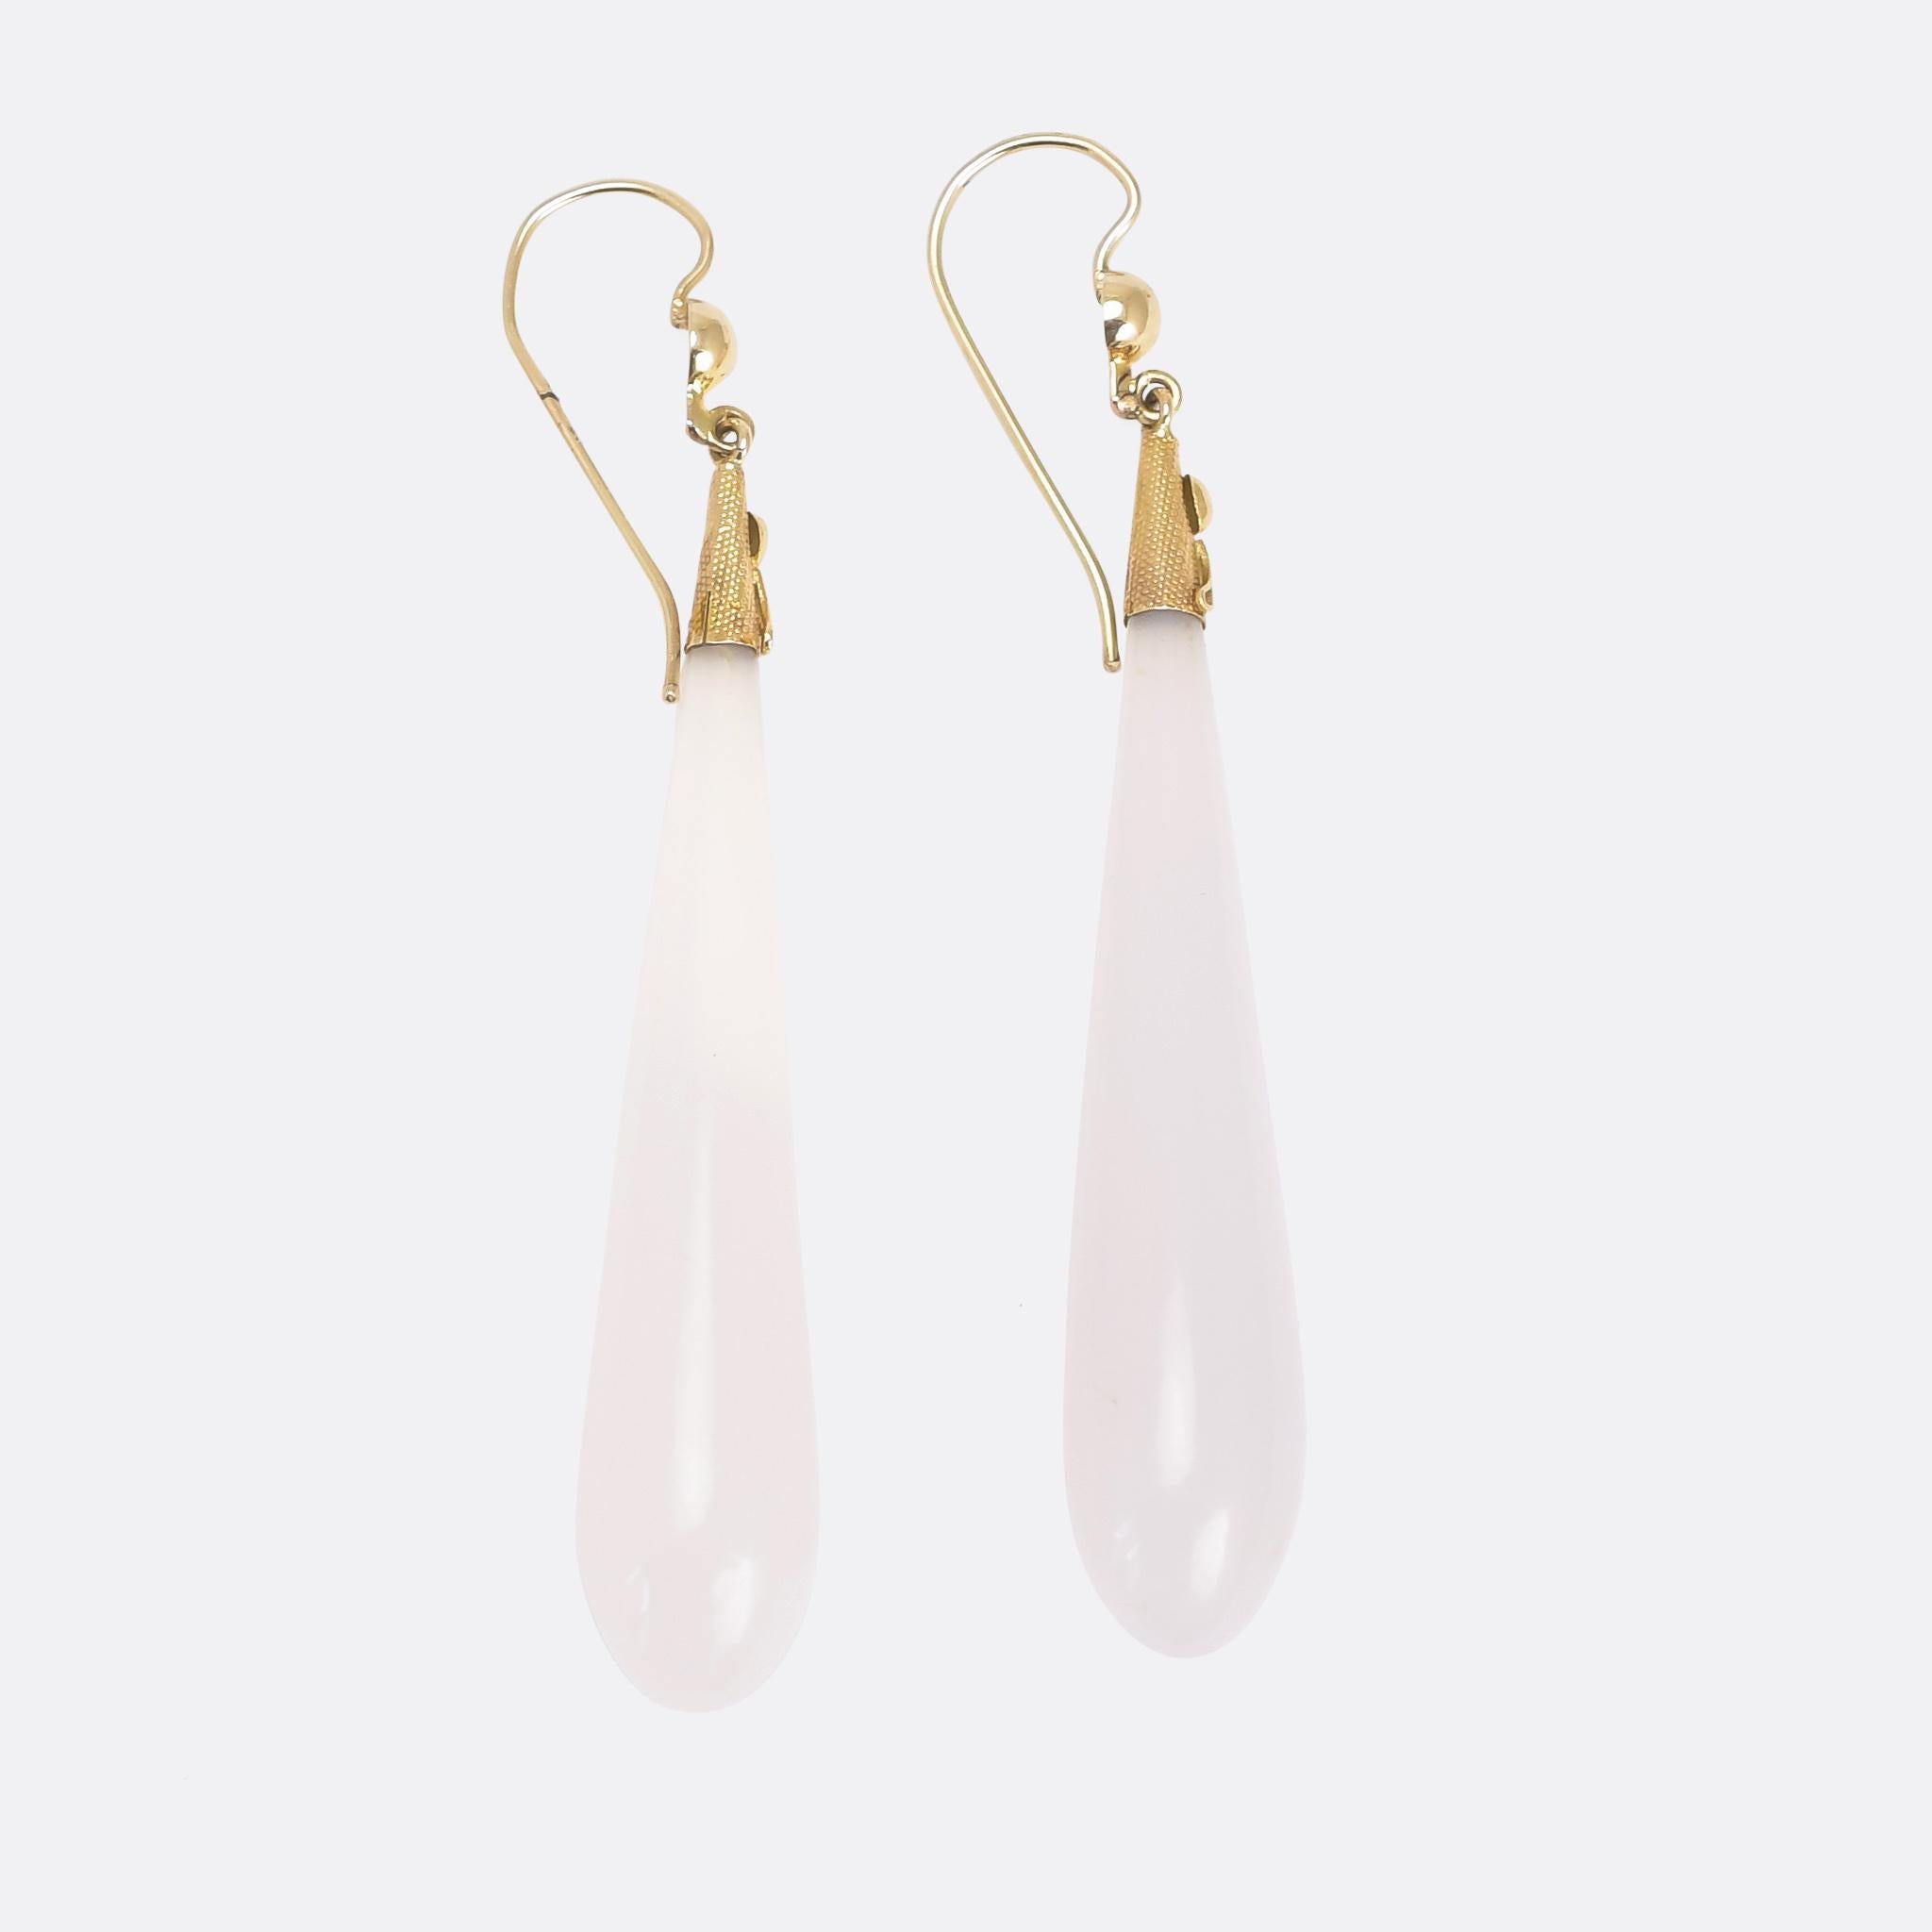 The most beautiful Georgian chalcedony teardrop earrings dating from the 1830s. The tops are textured 15 karat gold, with applied gold ornamentation, and the stones are a gorgeous pale milky blue colour. With a 6cm drop they're a great length, and